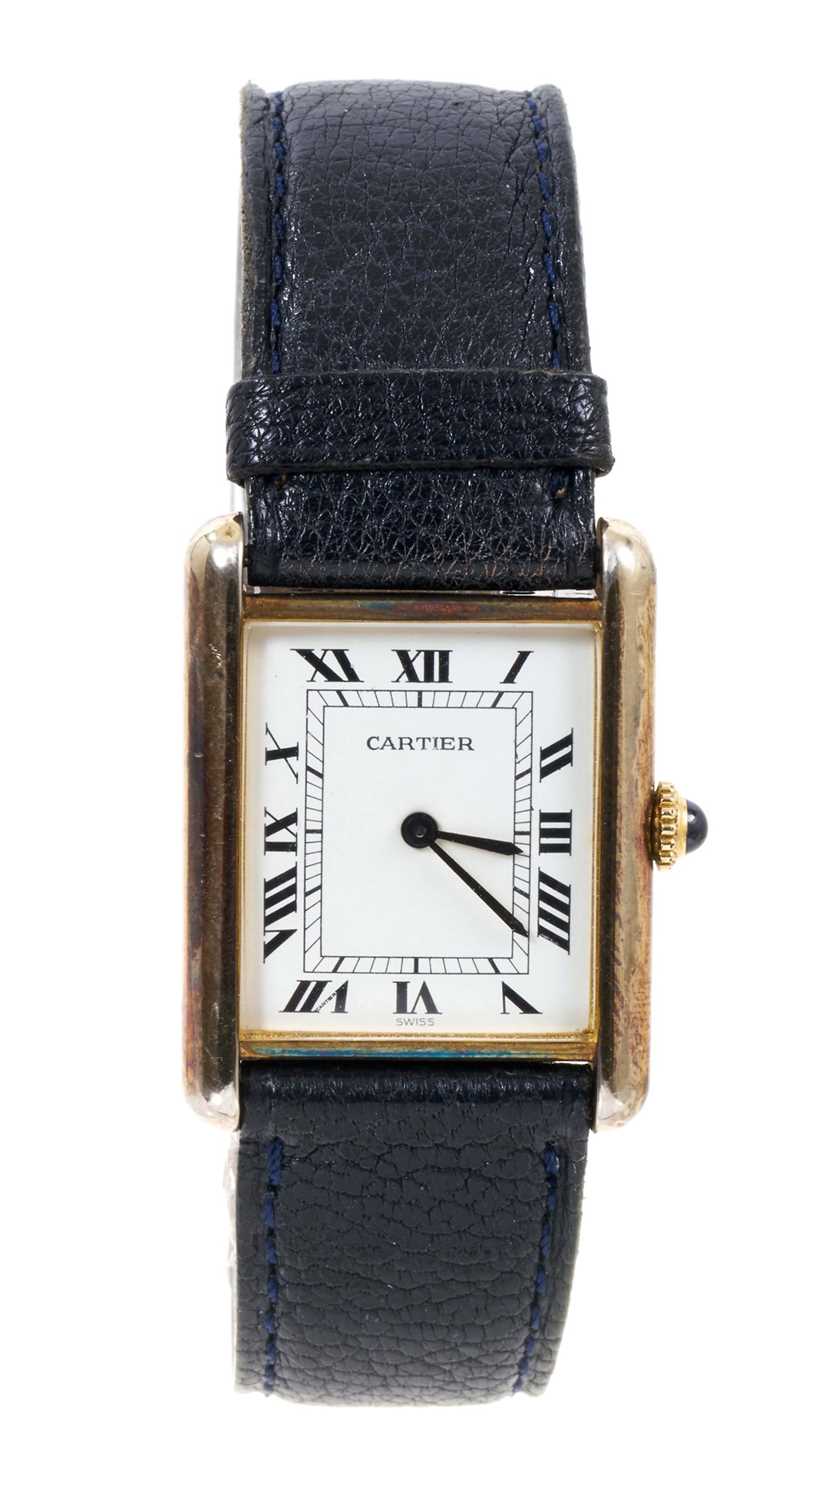 Cartier silver gilt Tank wristwatch with manual wind movement